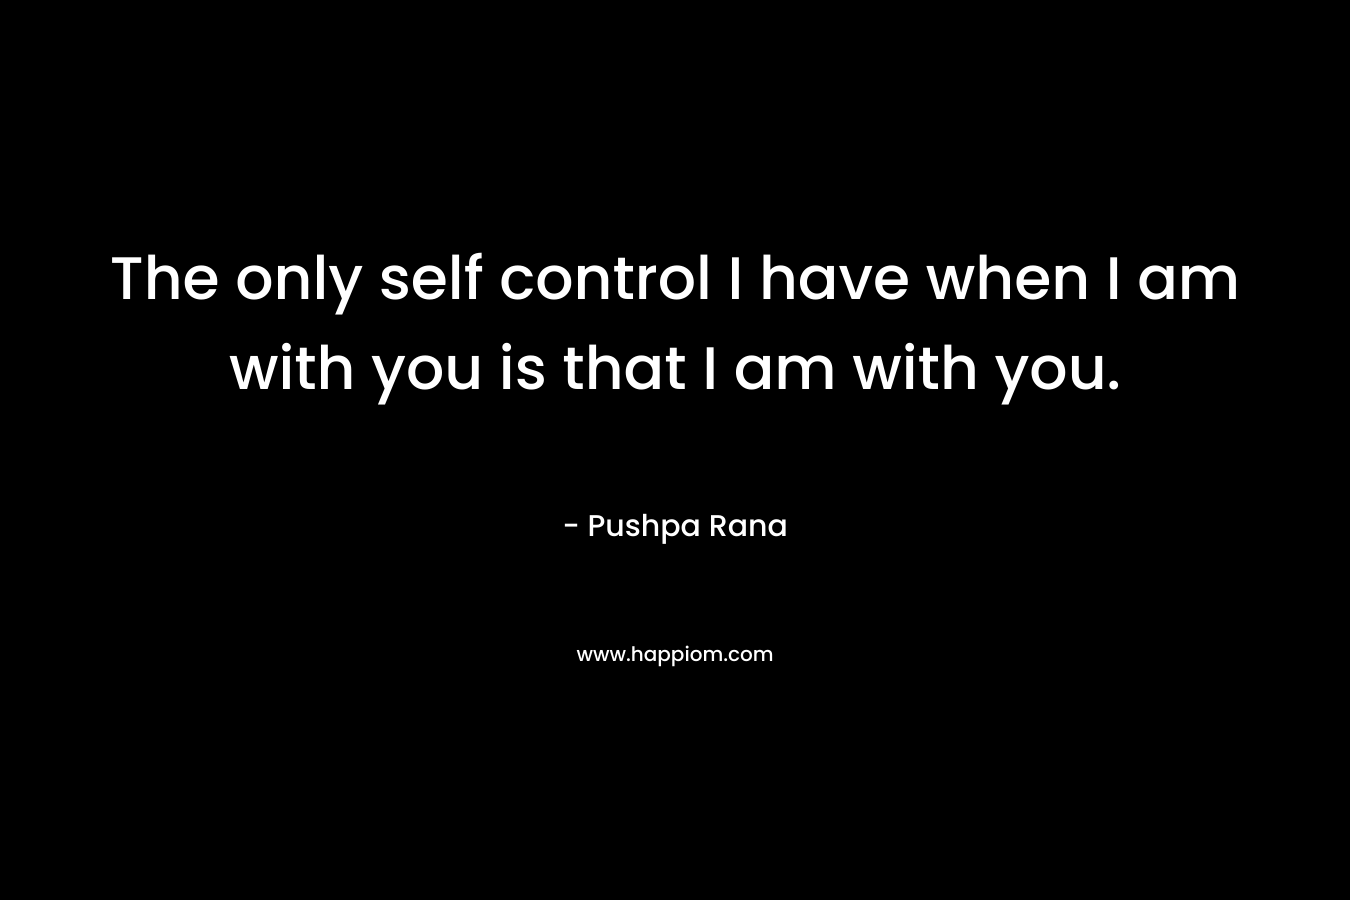 The only self control I have when I am with you is that I am with you. – Pushpa Rana